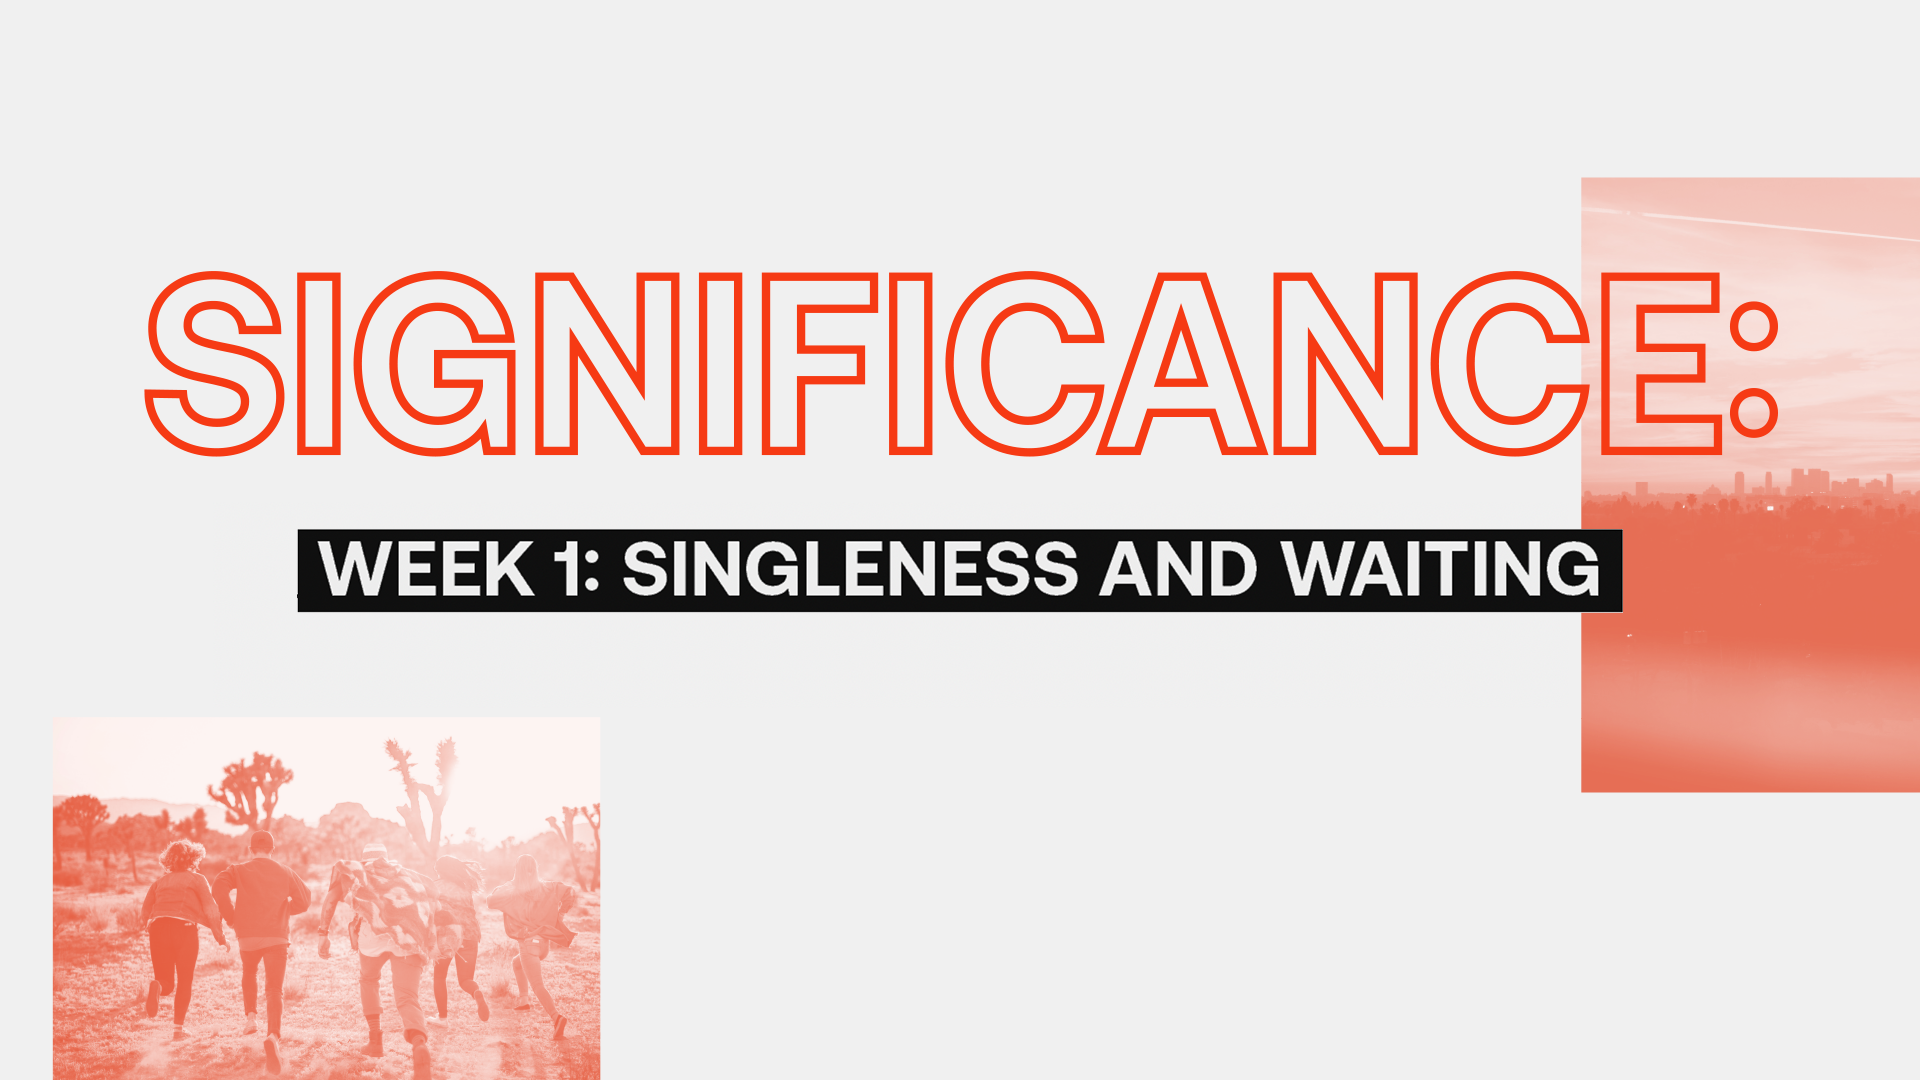 Significance: Singleness and Waiting 